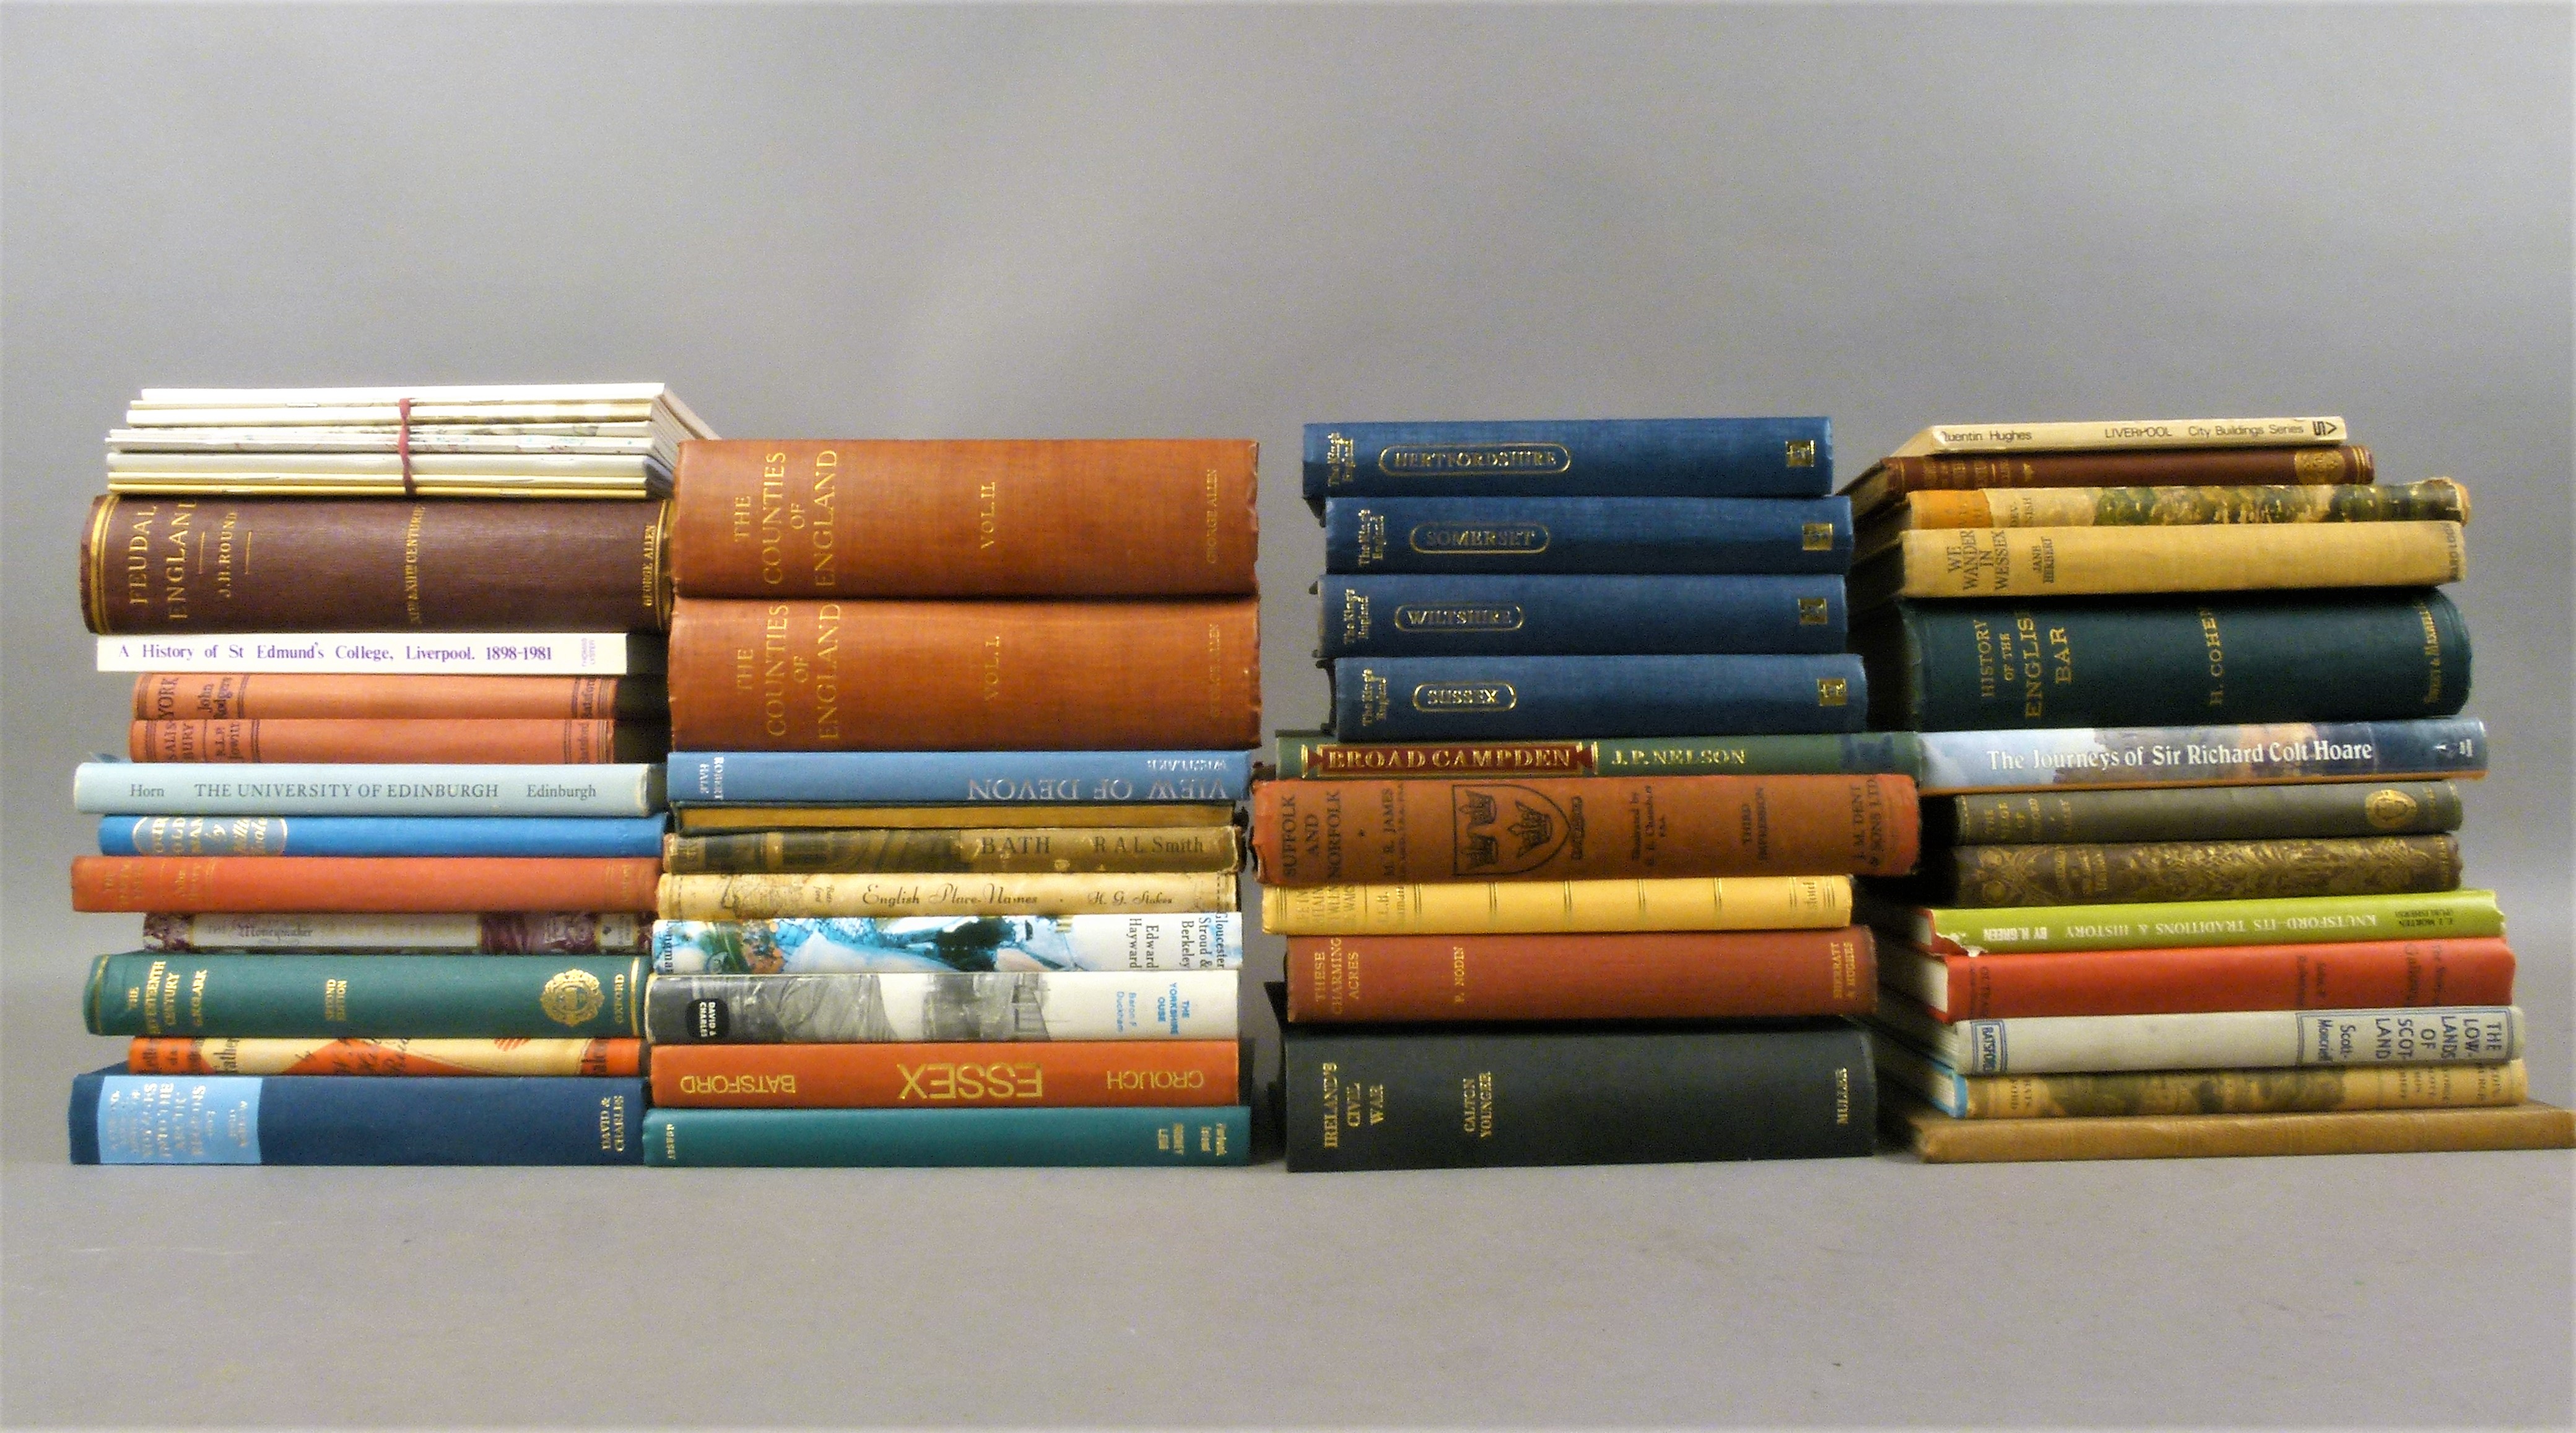 UK Topography and Natural History.- 43 vols of mixed UK topography and natural history, v.s., v.d.